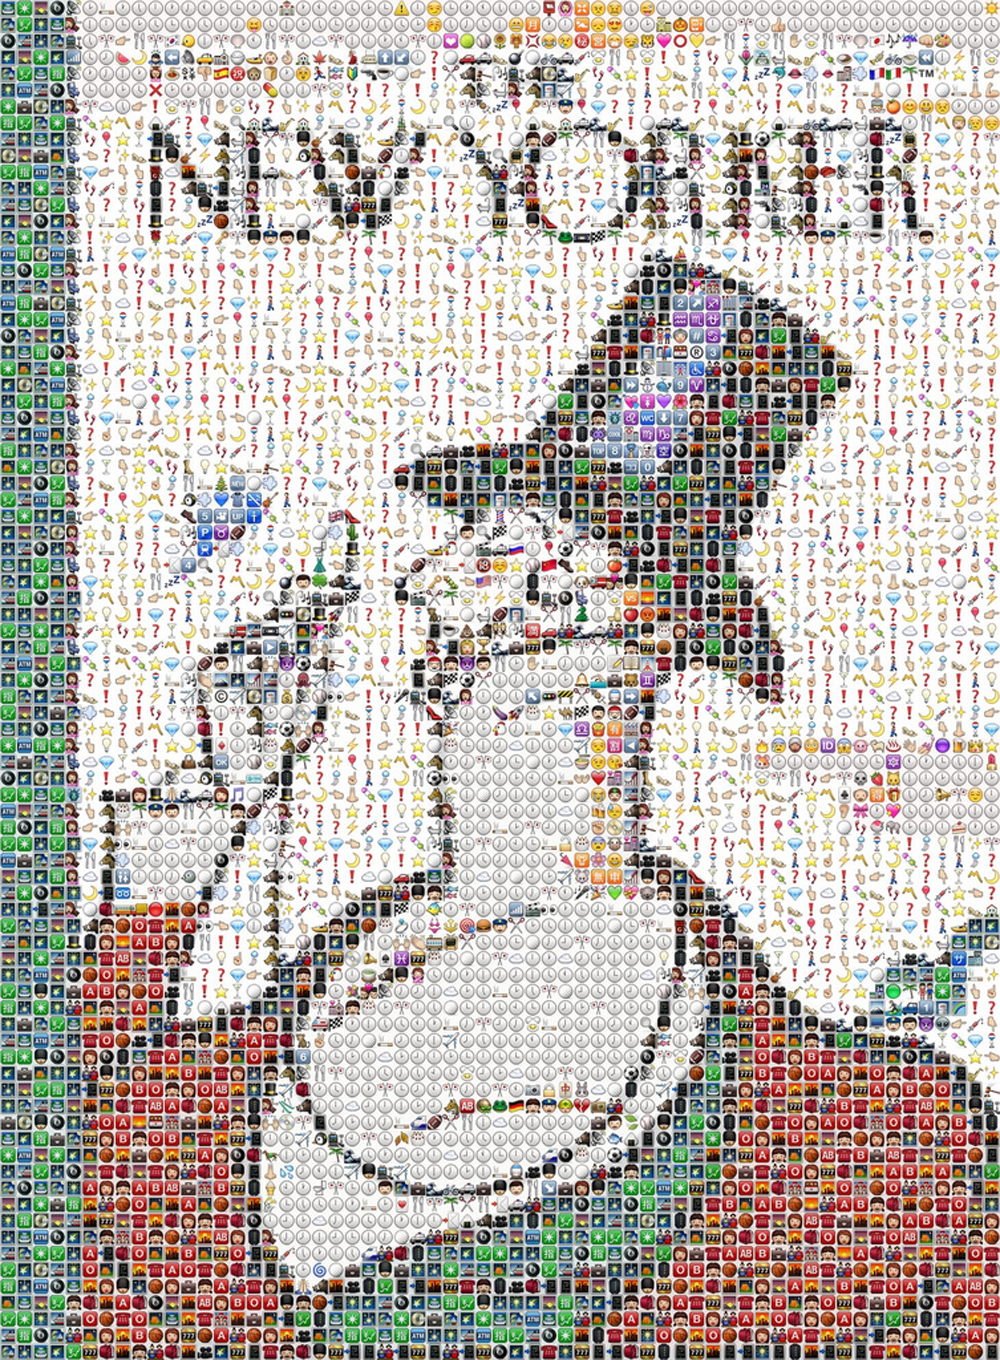 Fred Benenson's Emoji cover of The New Yorker